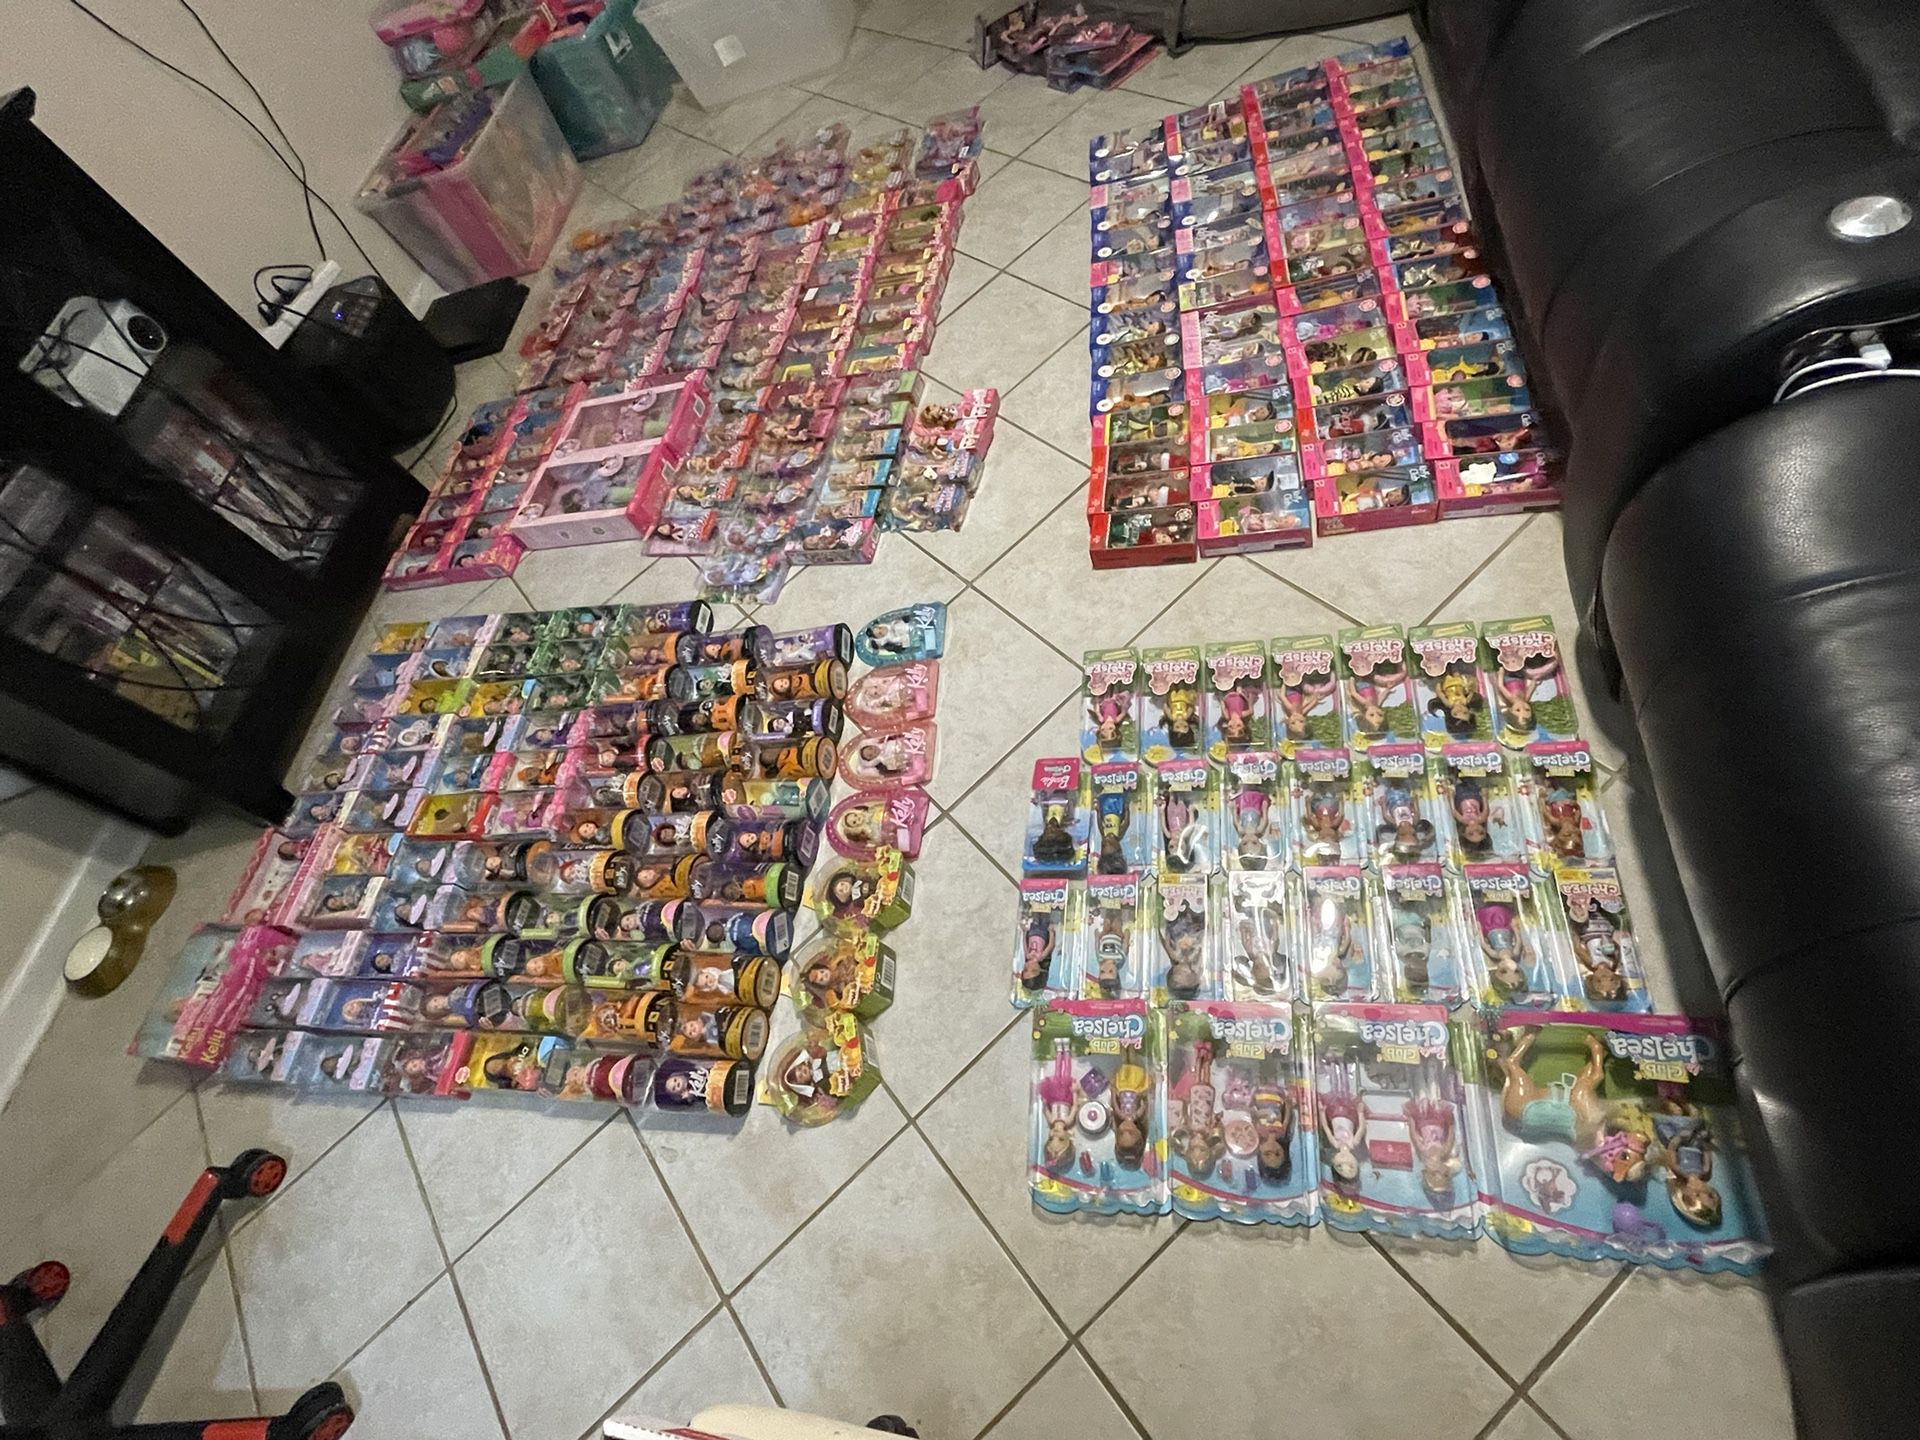 HUGE Barbie Doll Collection for SALE!!!!